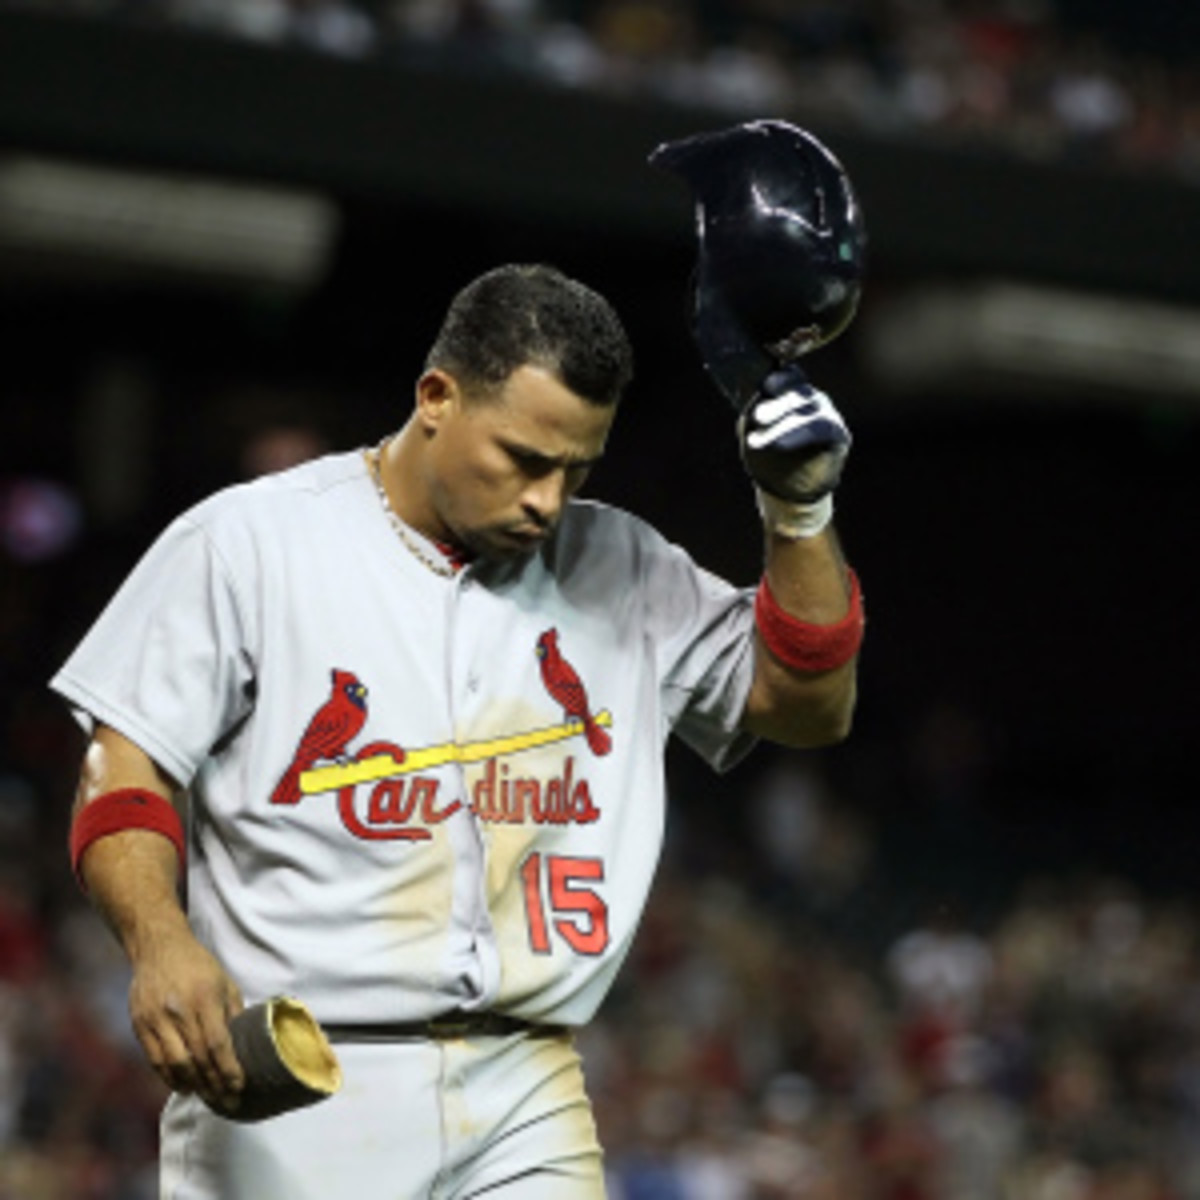 Rafael Furcal will undergo Tommy John surgery and likely miss the season. (Christian Petersen/Getty Images)